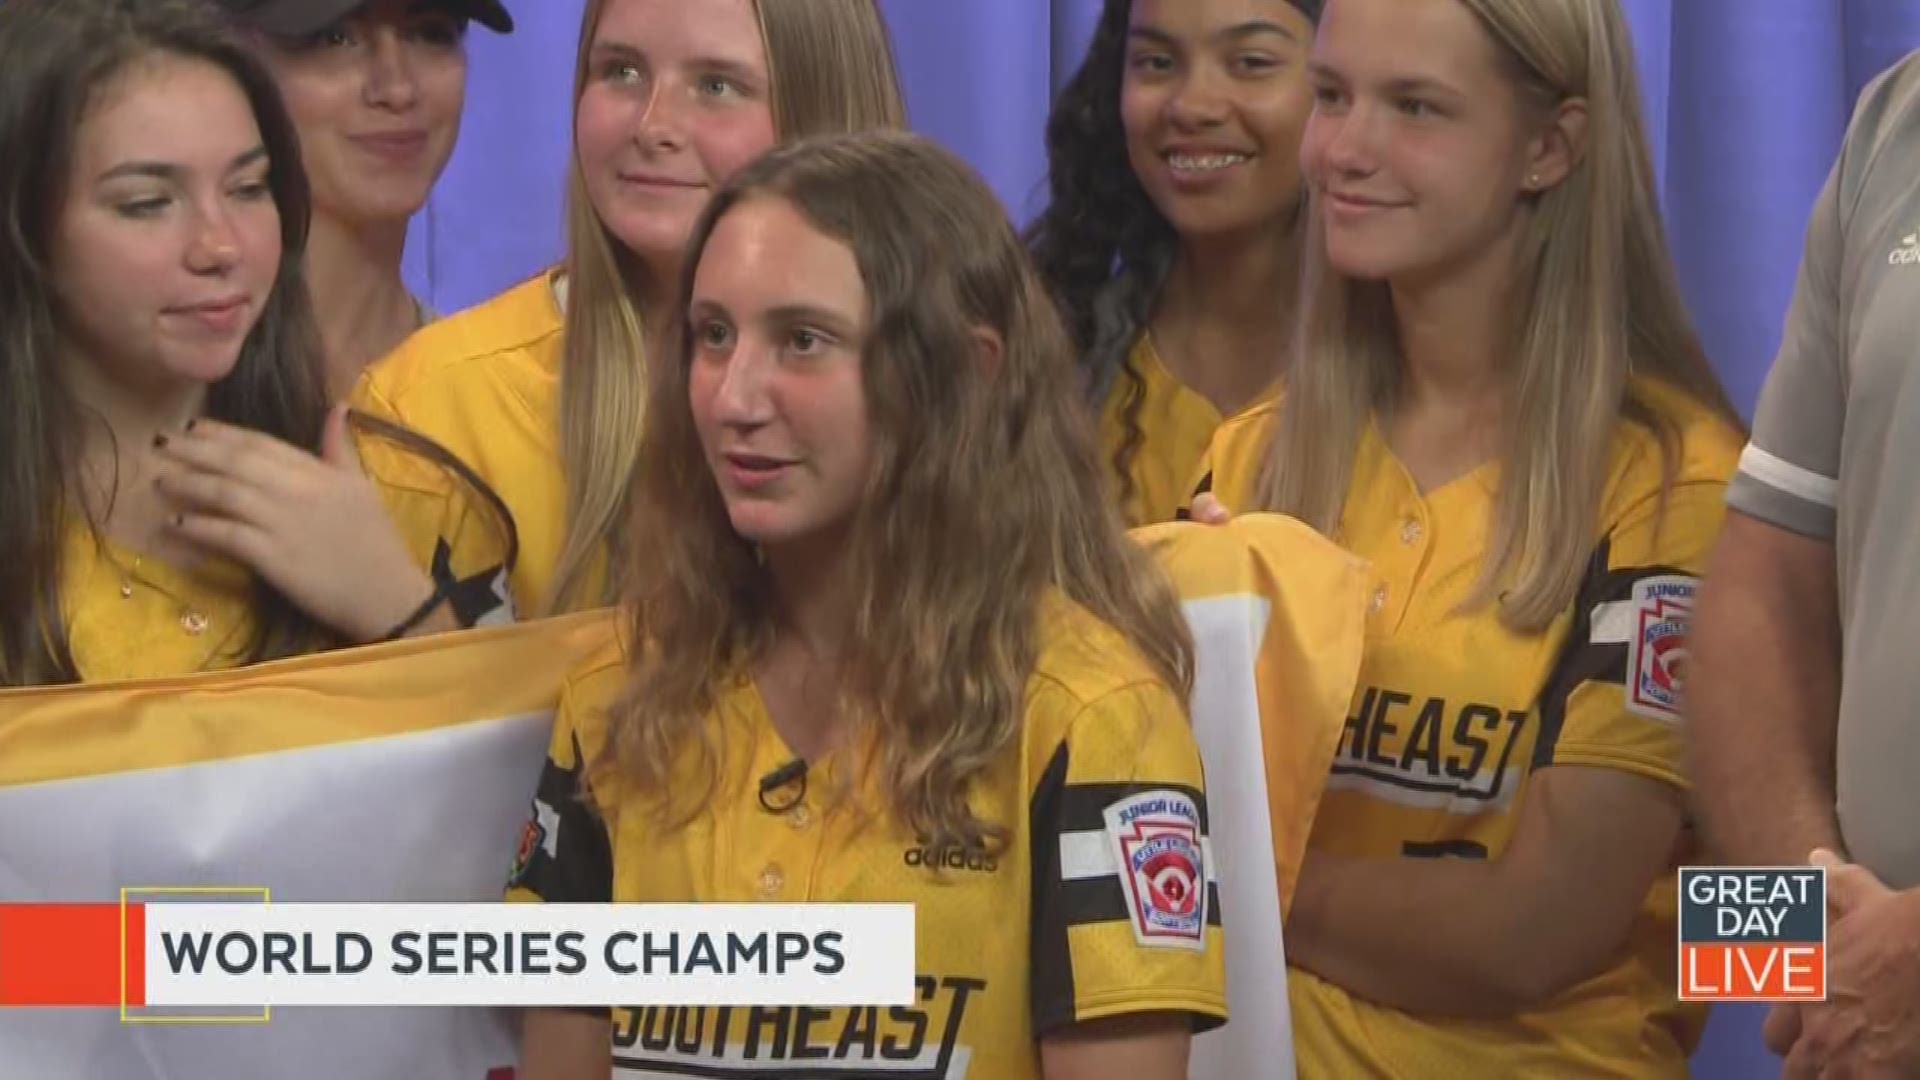 The South Tampa All-Stars girls softball team won big over the the weekend, bringing home the Little League world-series championship title.